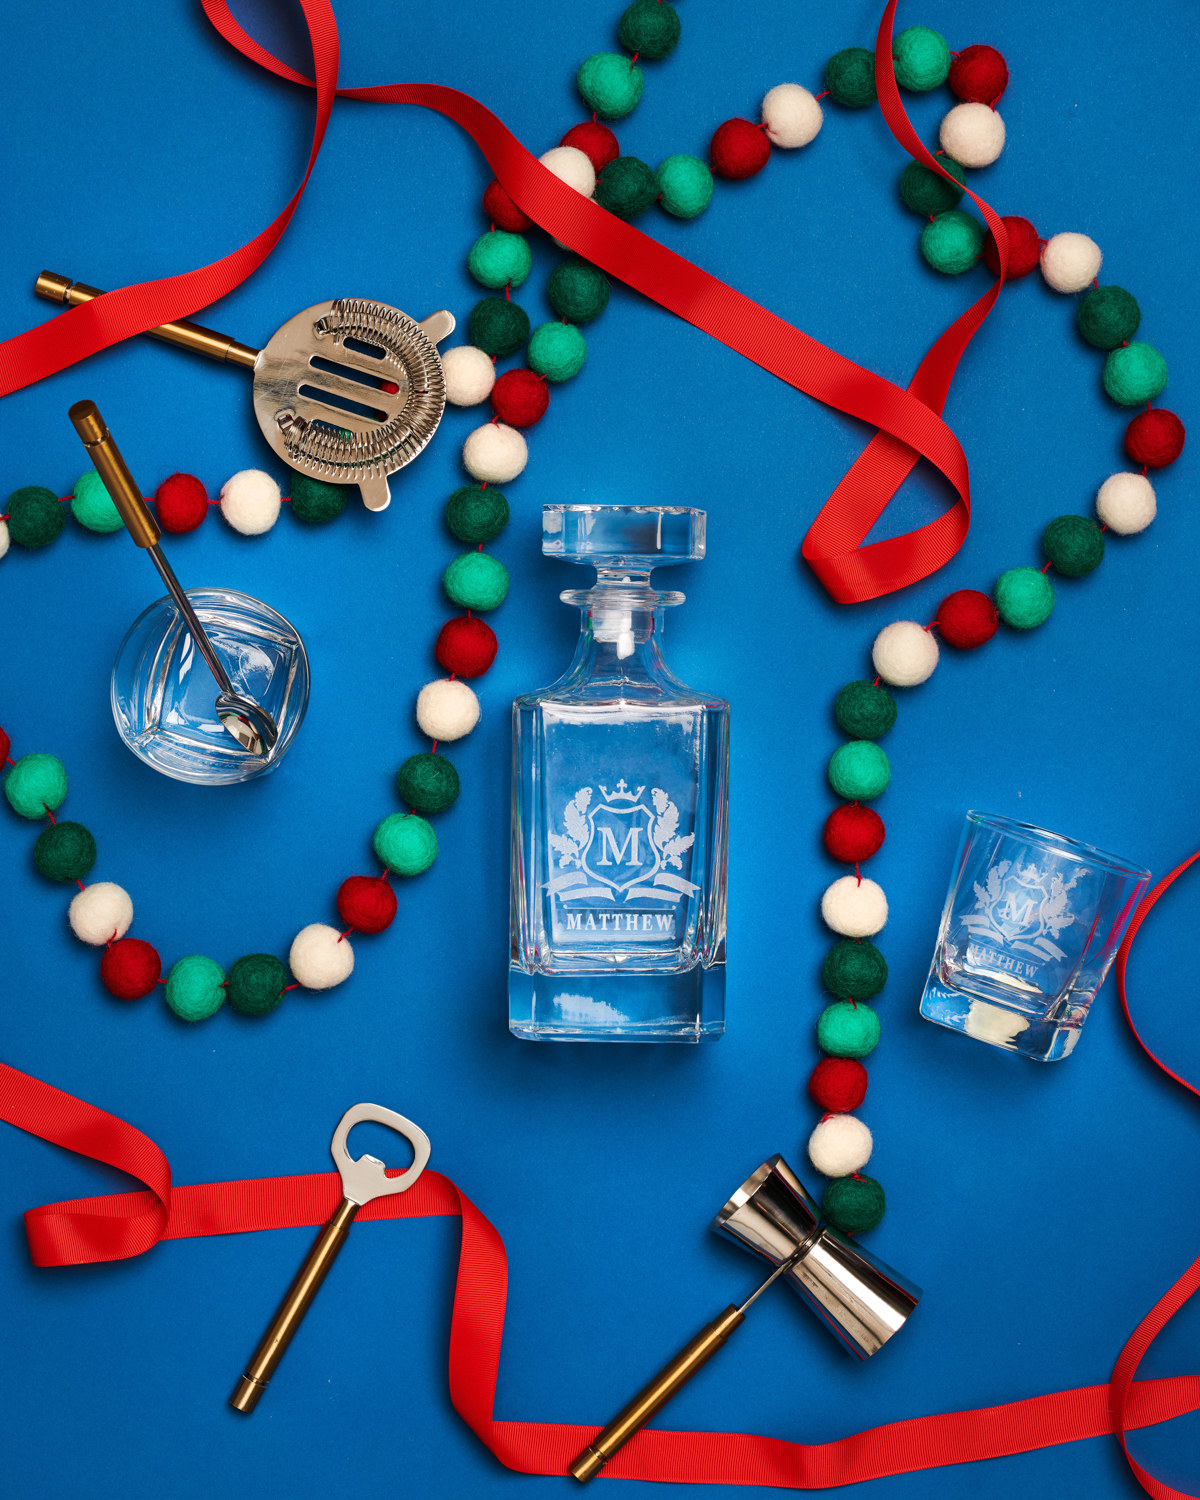 Monogrammed whiskey decanter and glasses featured in holiday flat lay